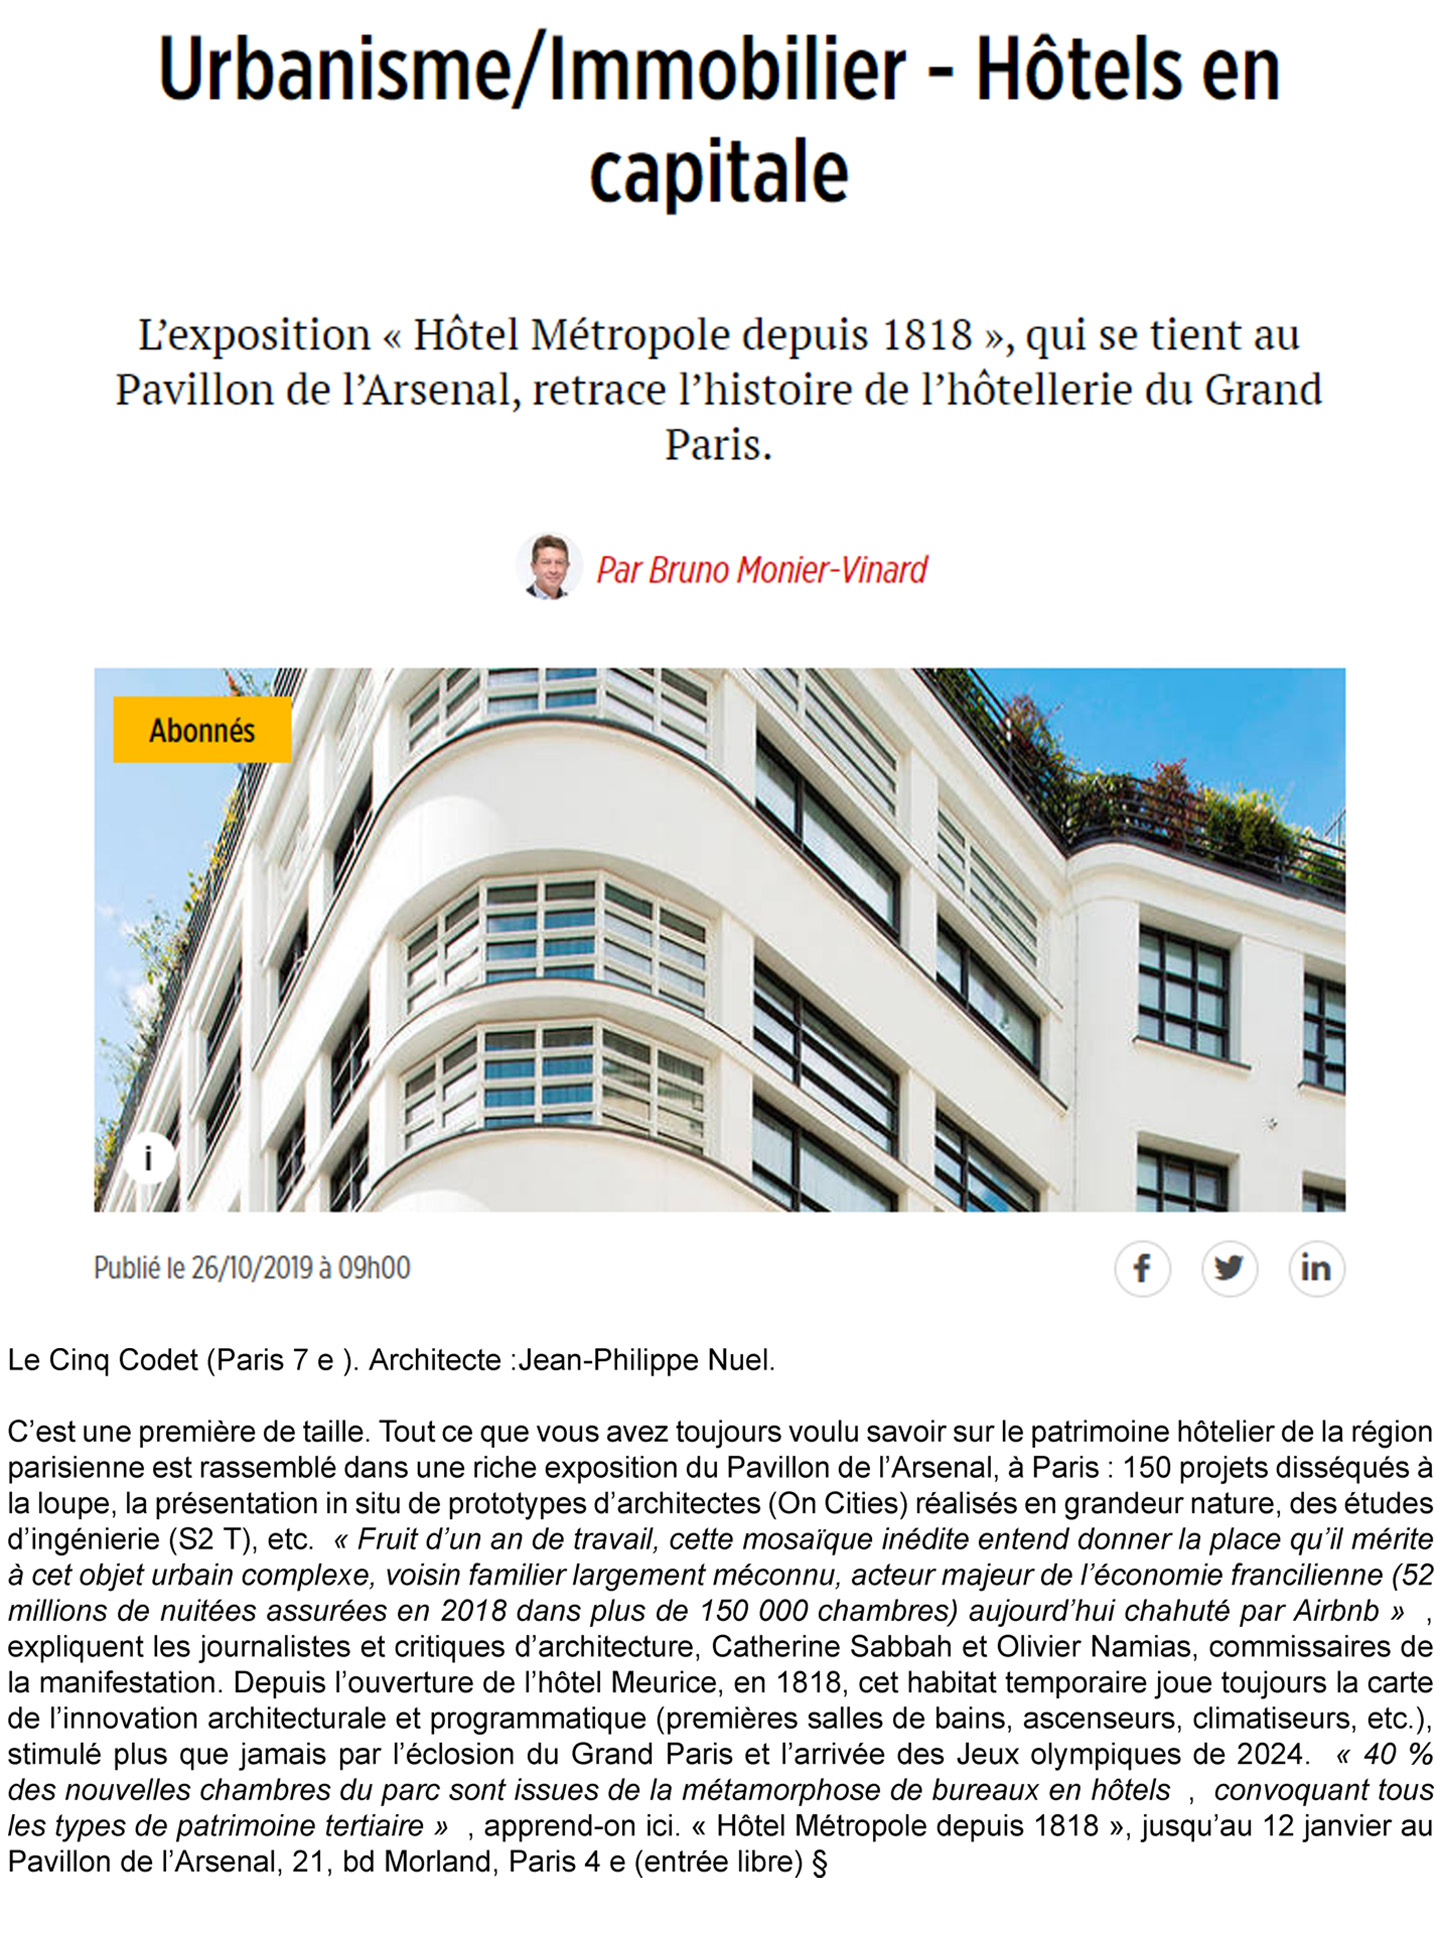 Article on the hotel Le Cinq Codet realized by the studio jean-Philippe Nuel in the magazine Le Poiont, new luxury hotel in Paris, luxury interior design